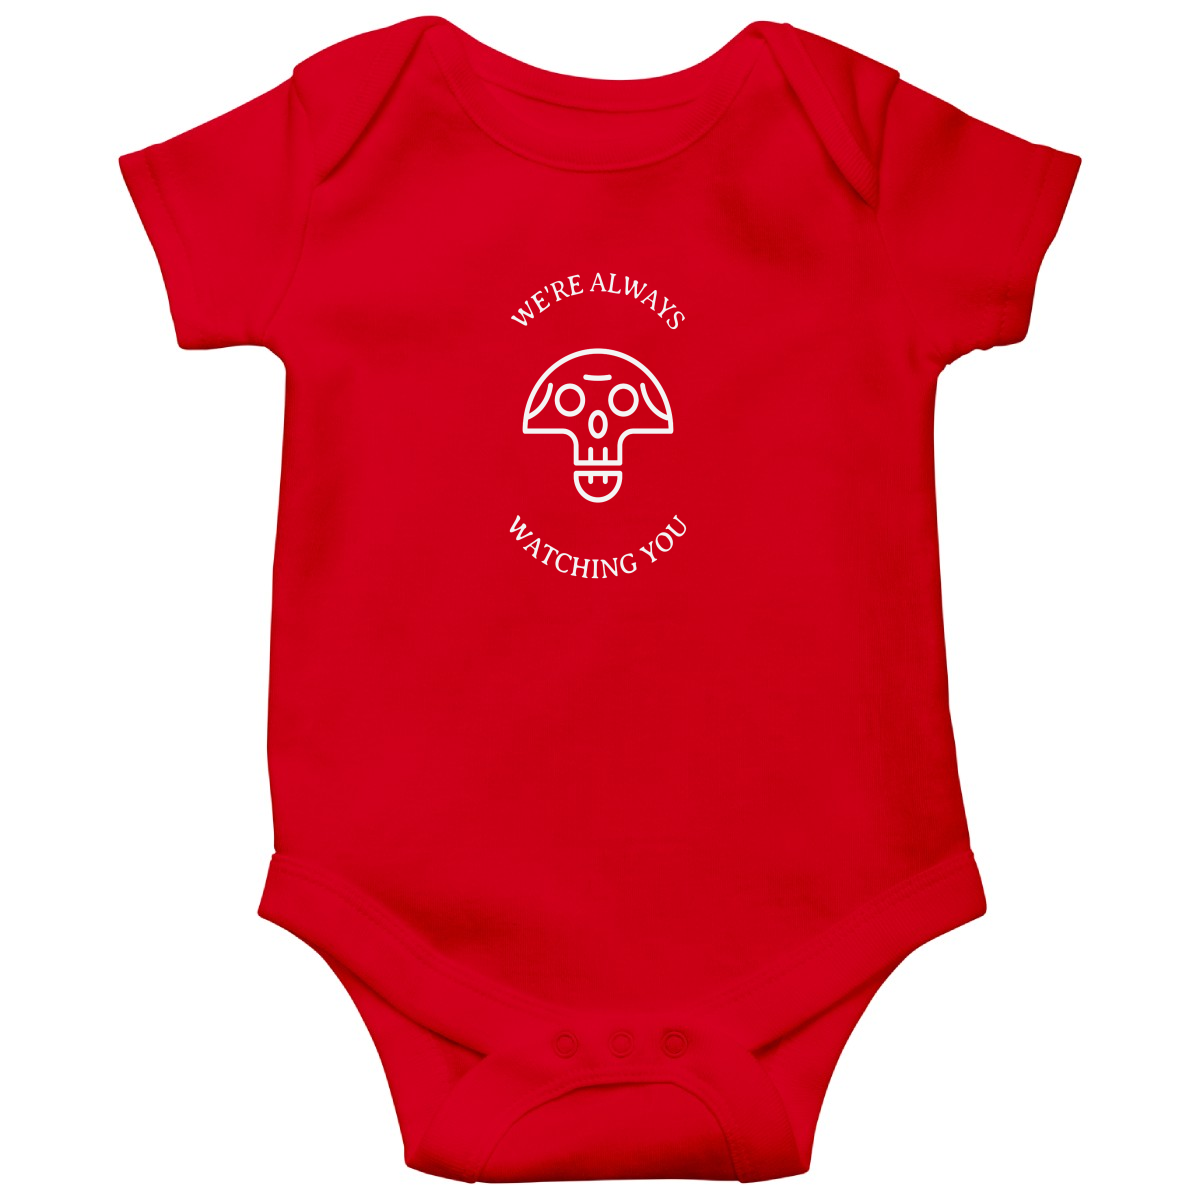 We're Always Watching You Baby Bodysuits | Red